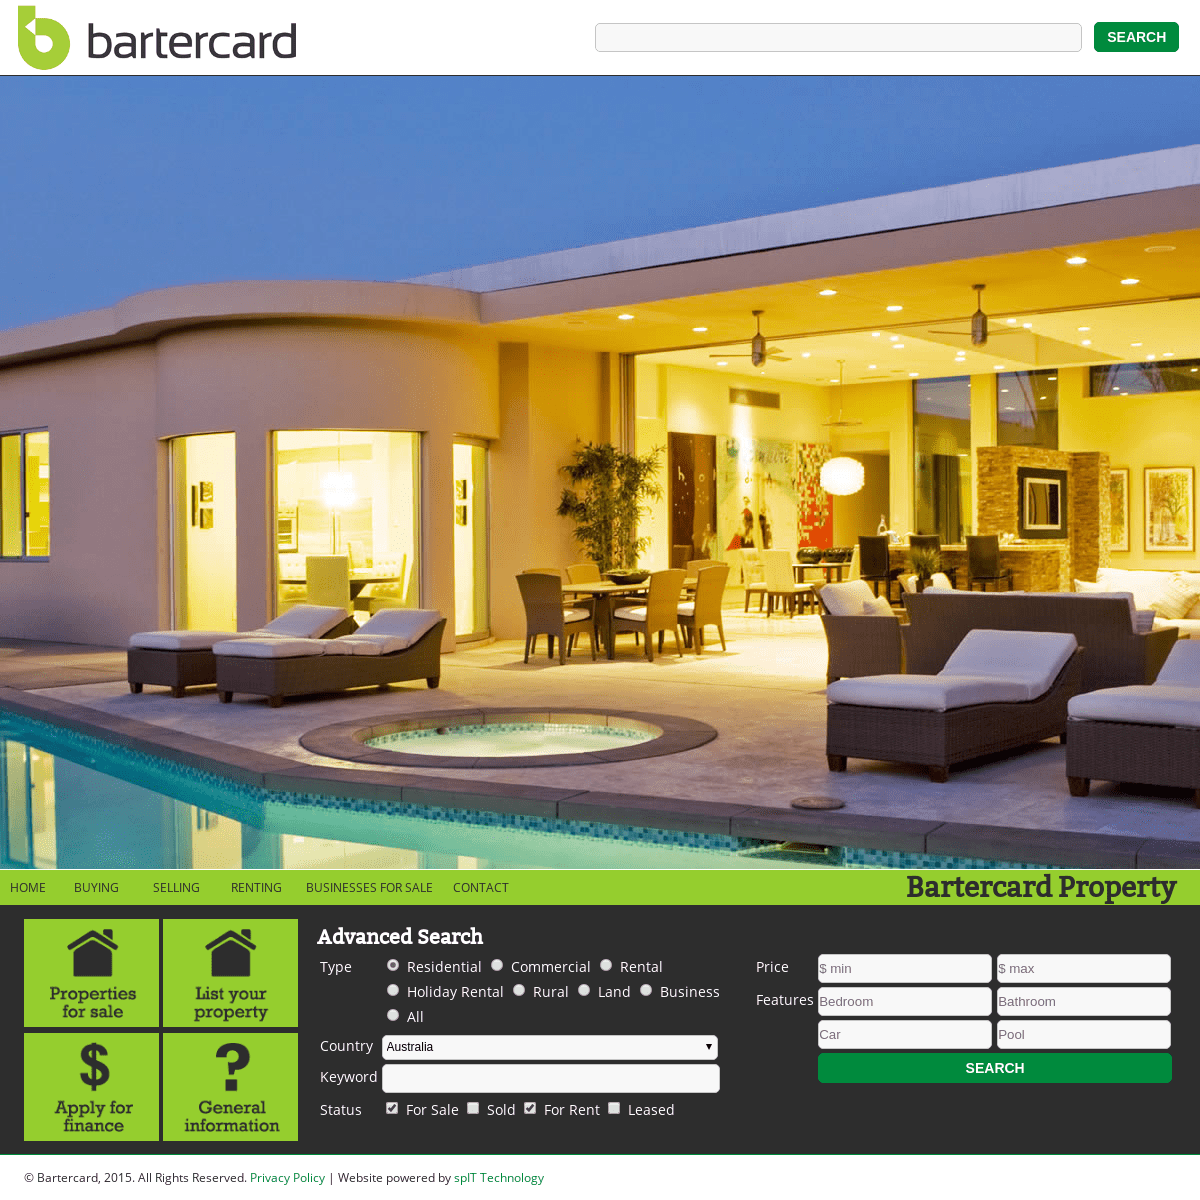 Bartercard Real Estate and Property for sale